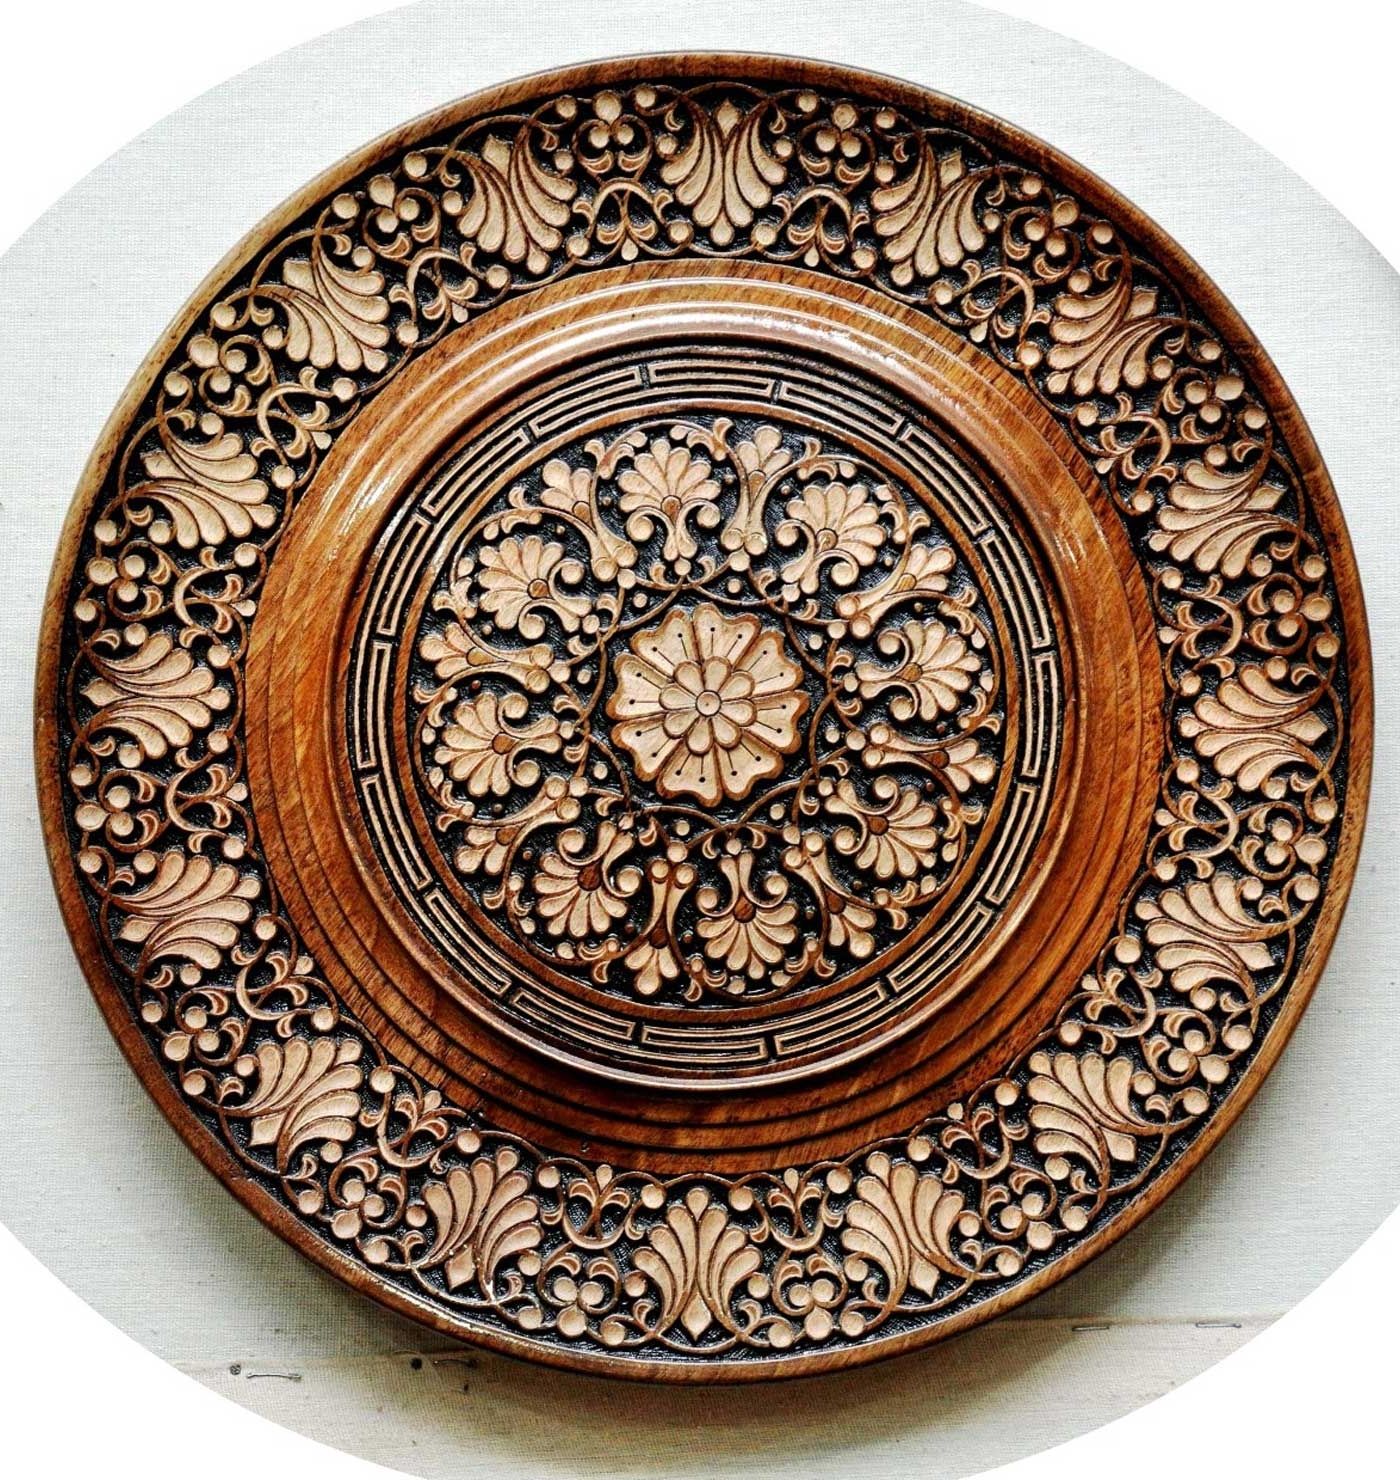 Most Recently Released Decorative Plates For Wall Art In Wall Decor Awesome Decorative Kitchen Plates For Wall Wall Plates 